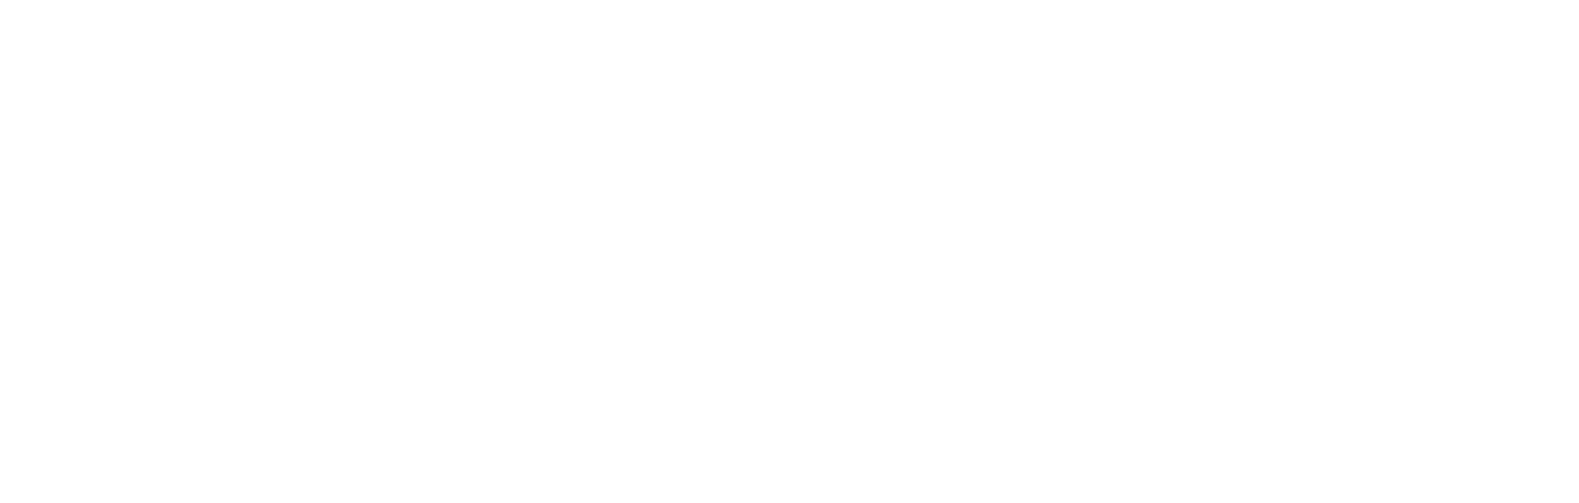 YOOZOO Interactive logo large for dark backgrounds (transparent PNG)